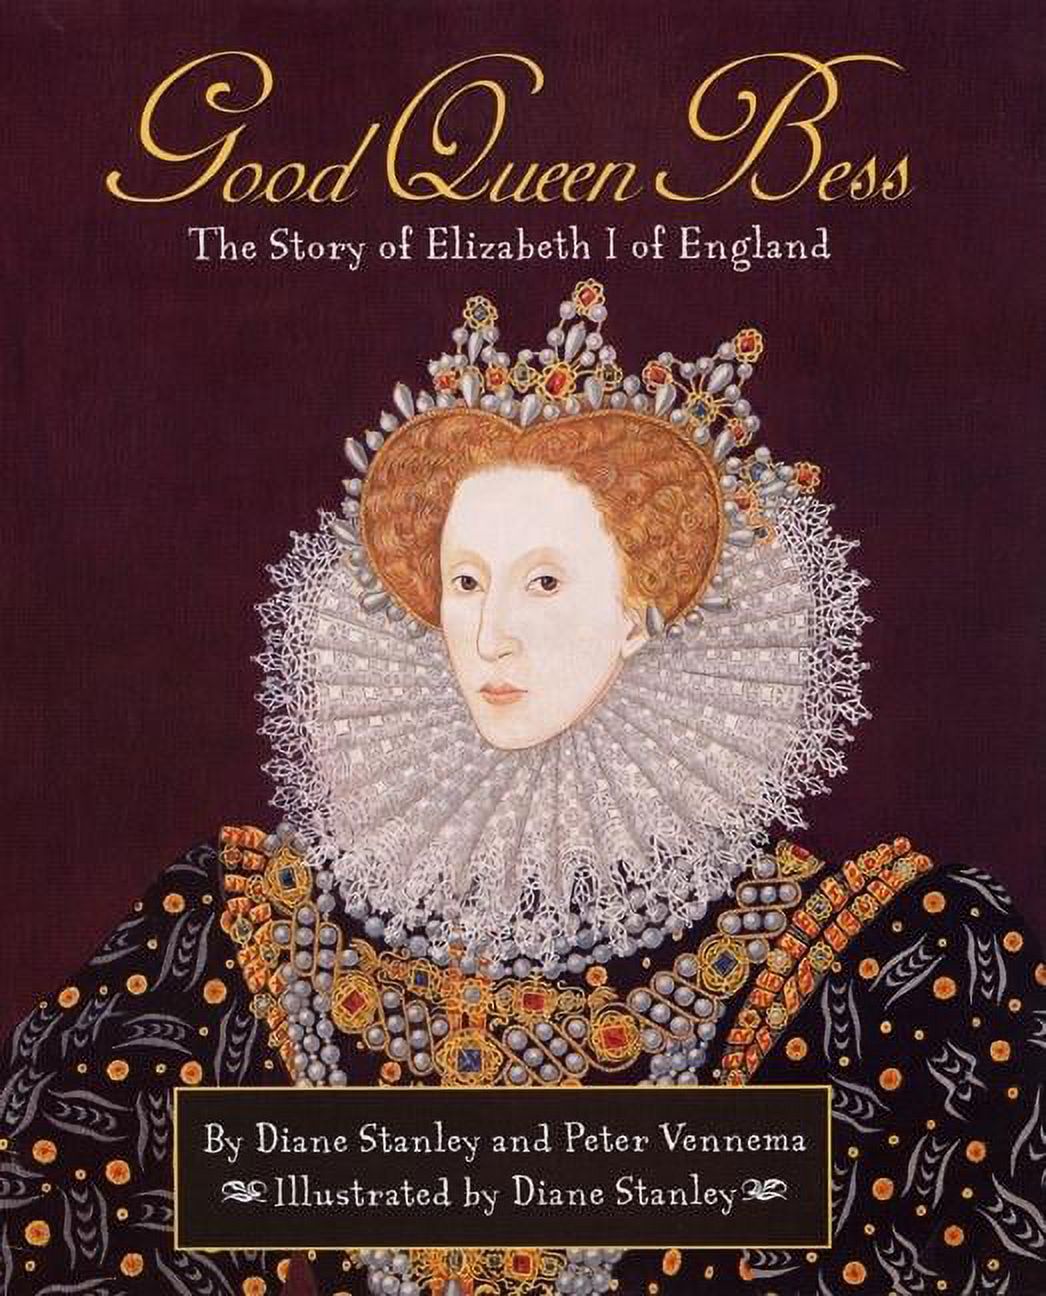 Pathways: Grade 5 Good Queen Bess: The Story of Elizabeth I of England Trade Book (Hardcover) - image 1 of 1